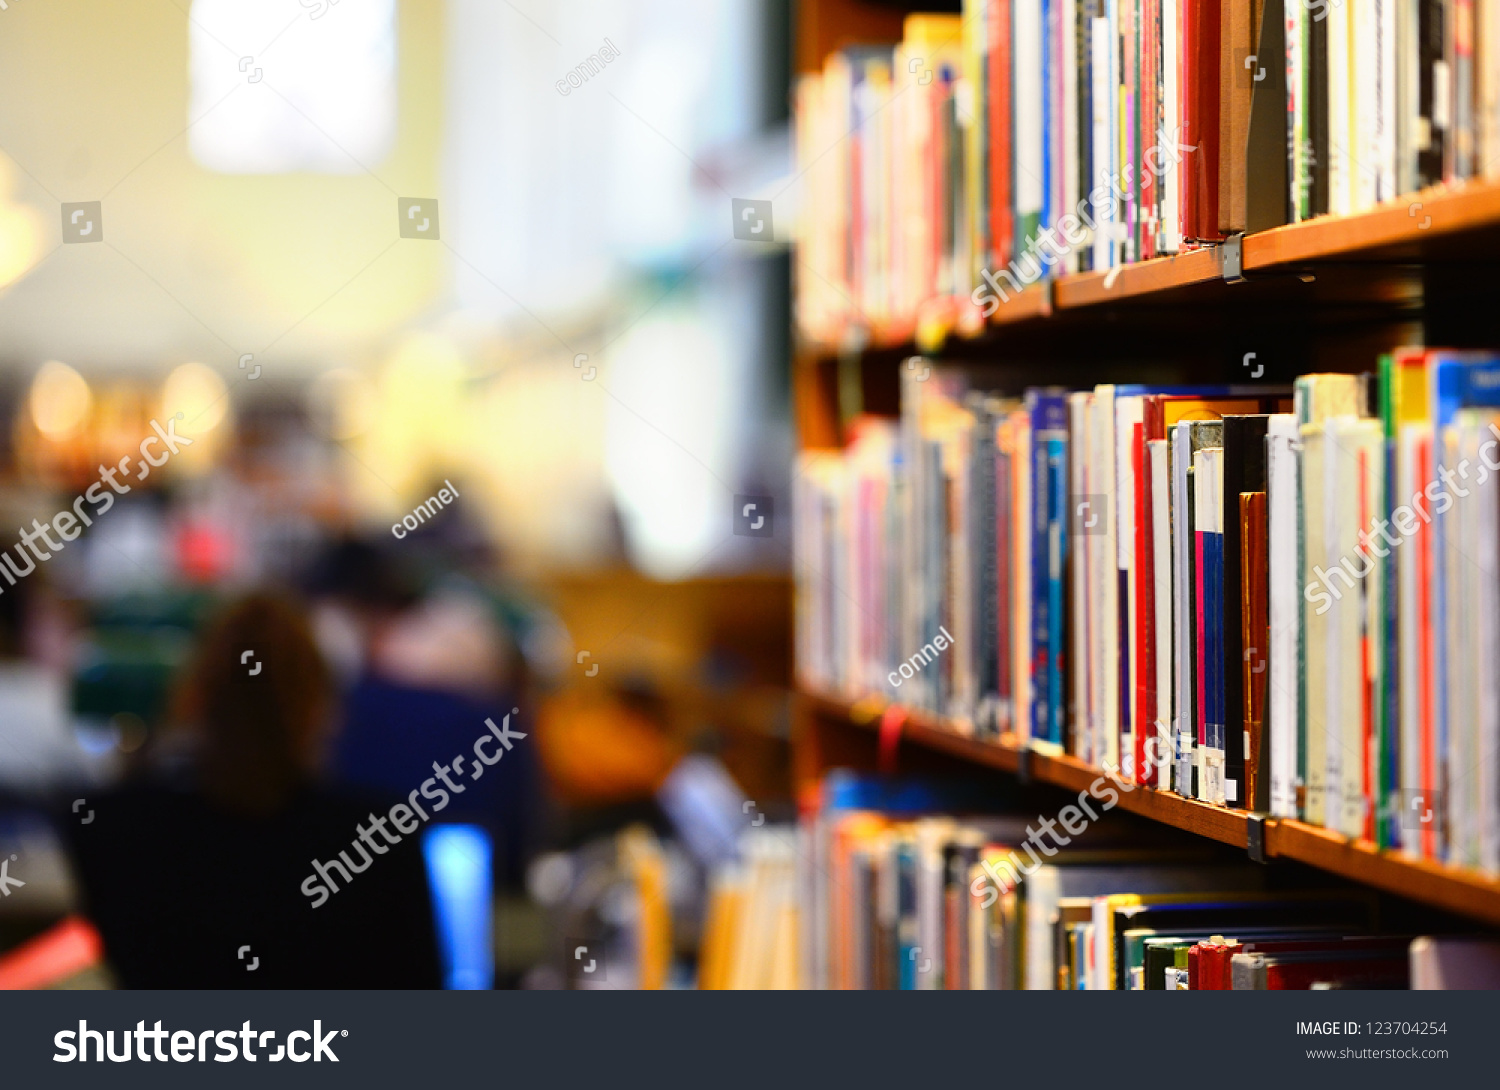 Books in public library, shallow DOF. #123704254